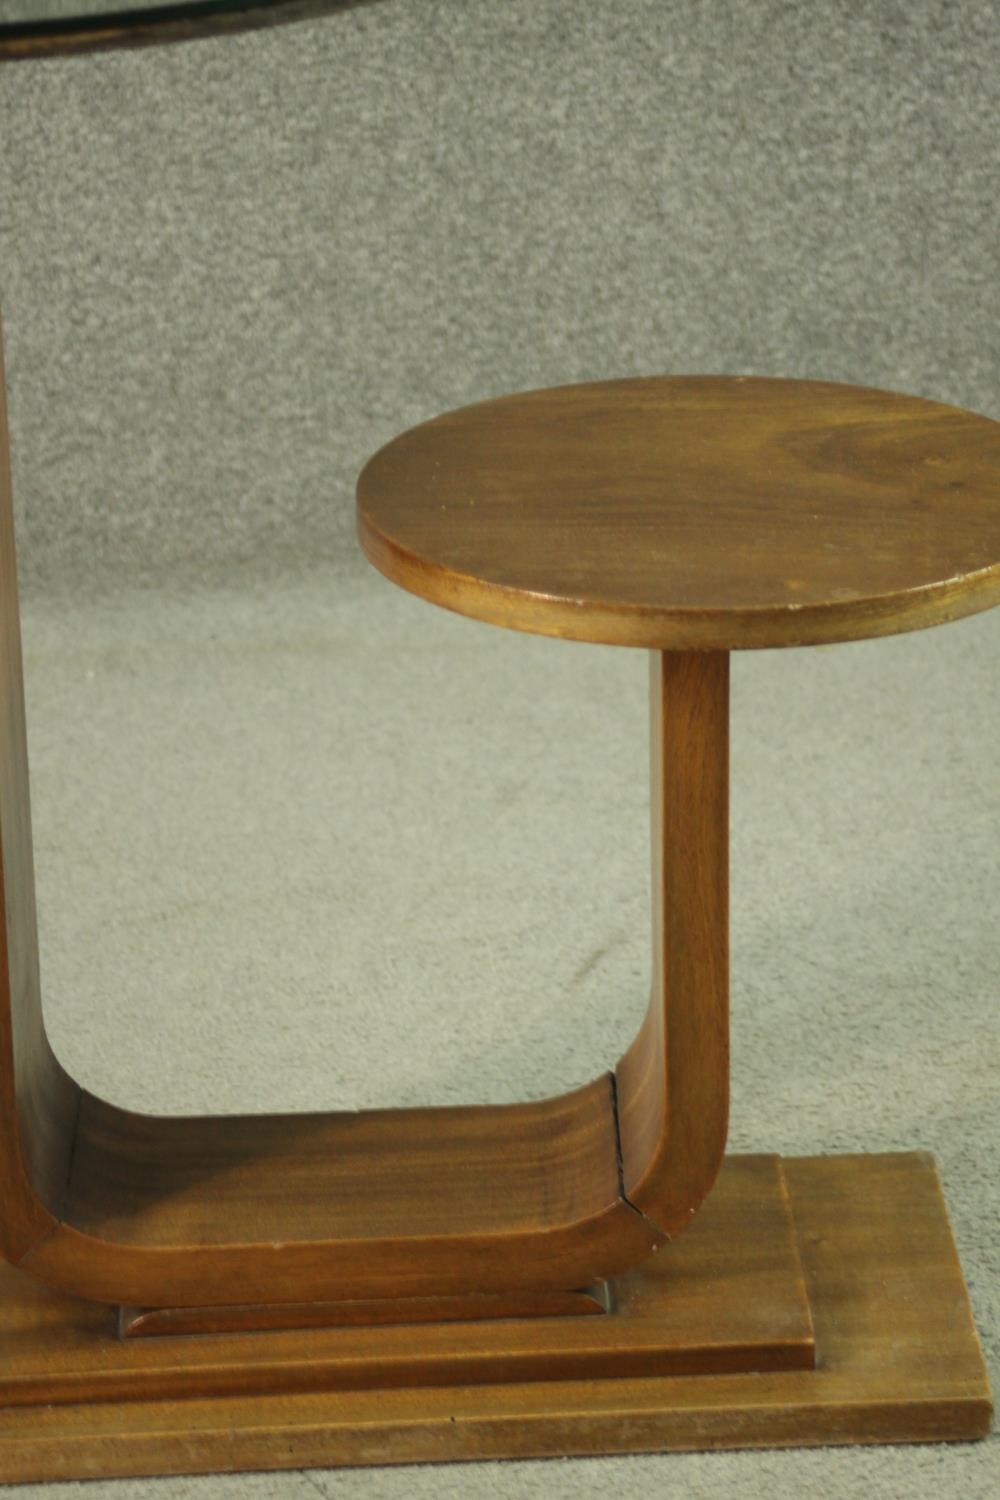 An Art Deco teak table and stool, with a circular glass table top, on a support which curves up to a - Image 3 of 8